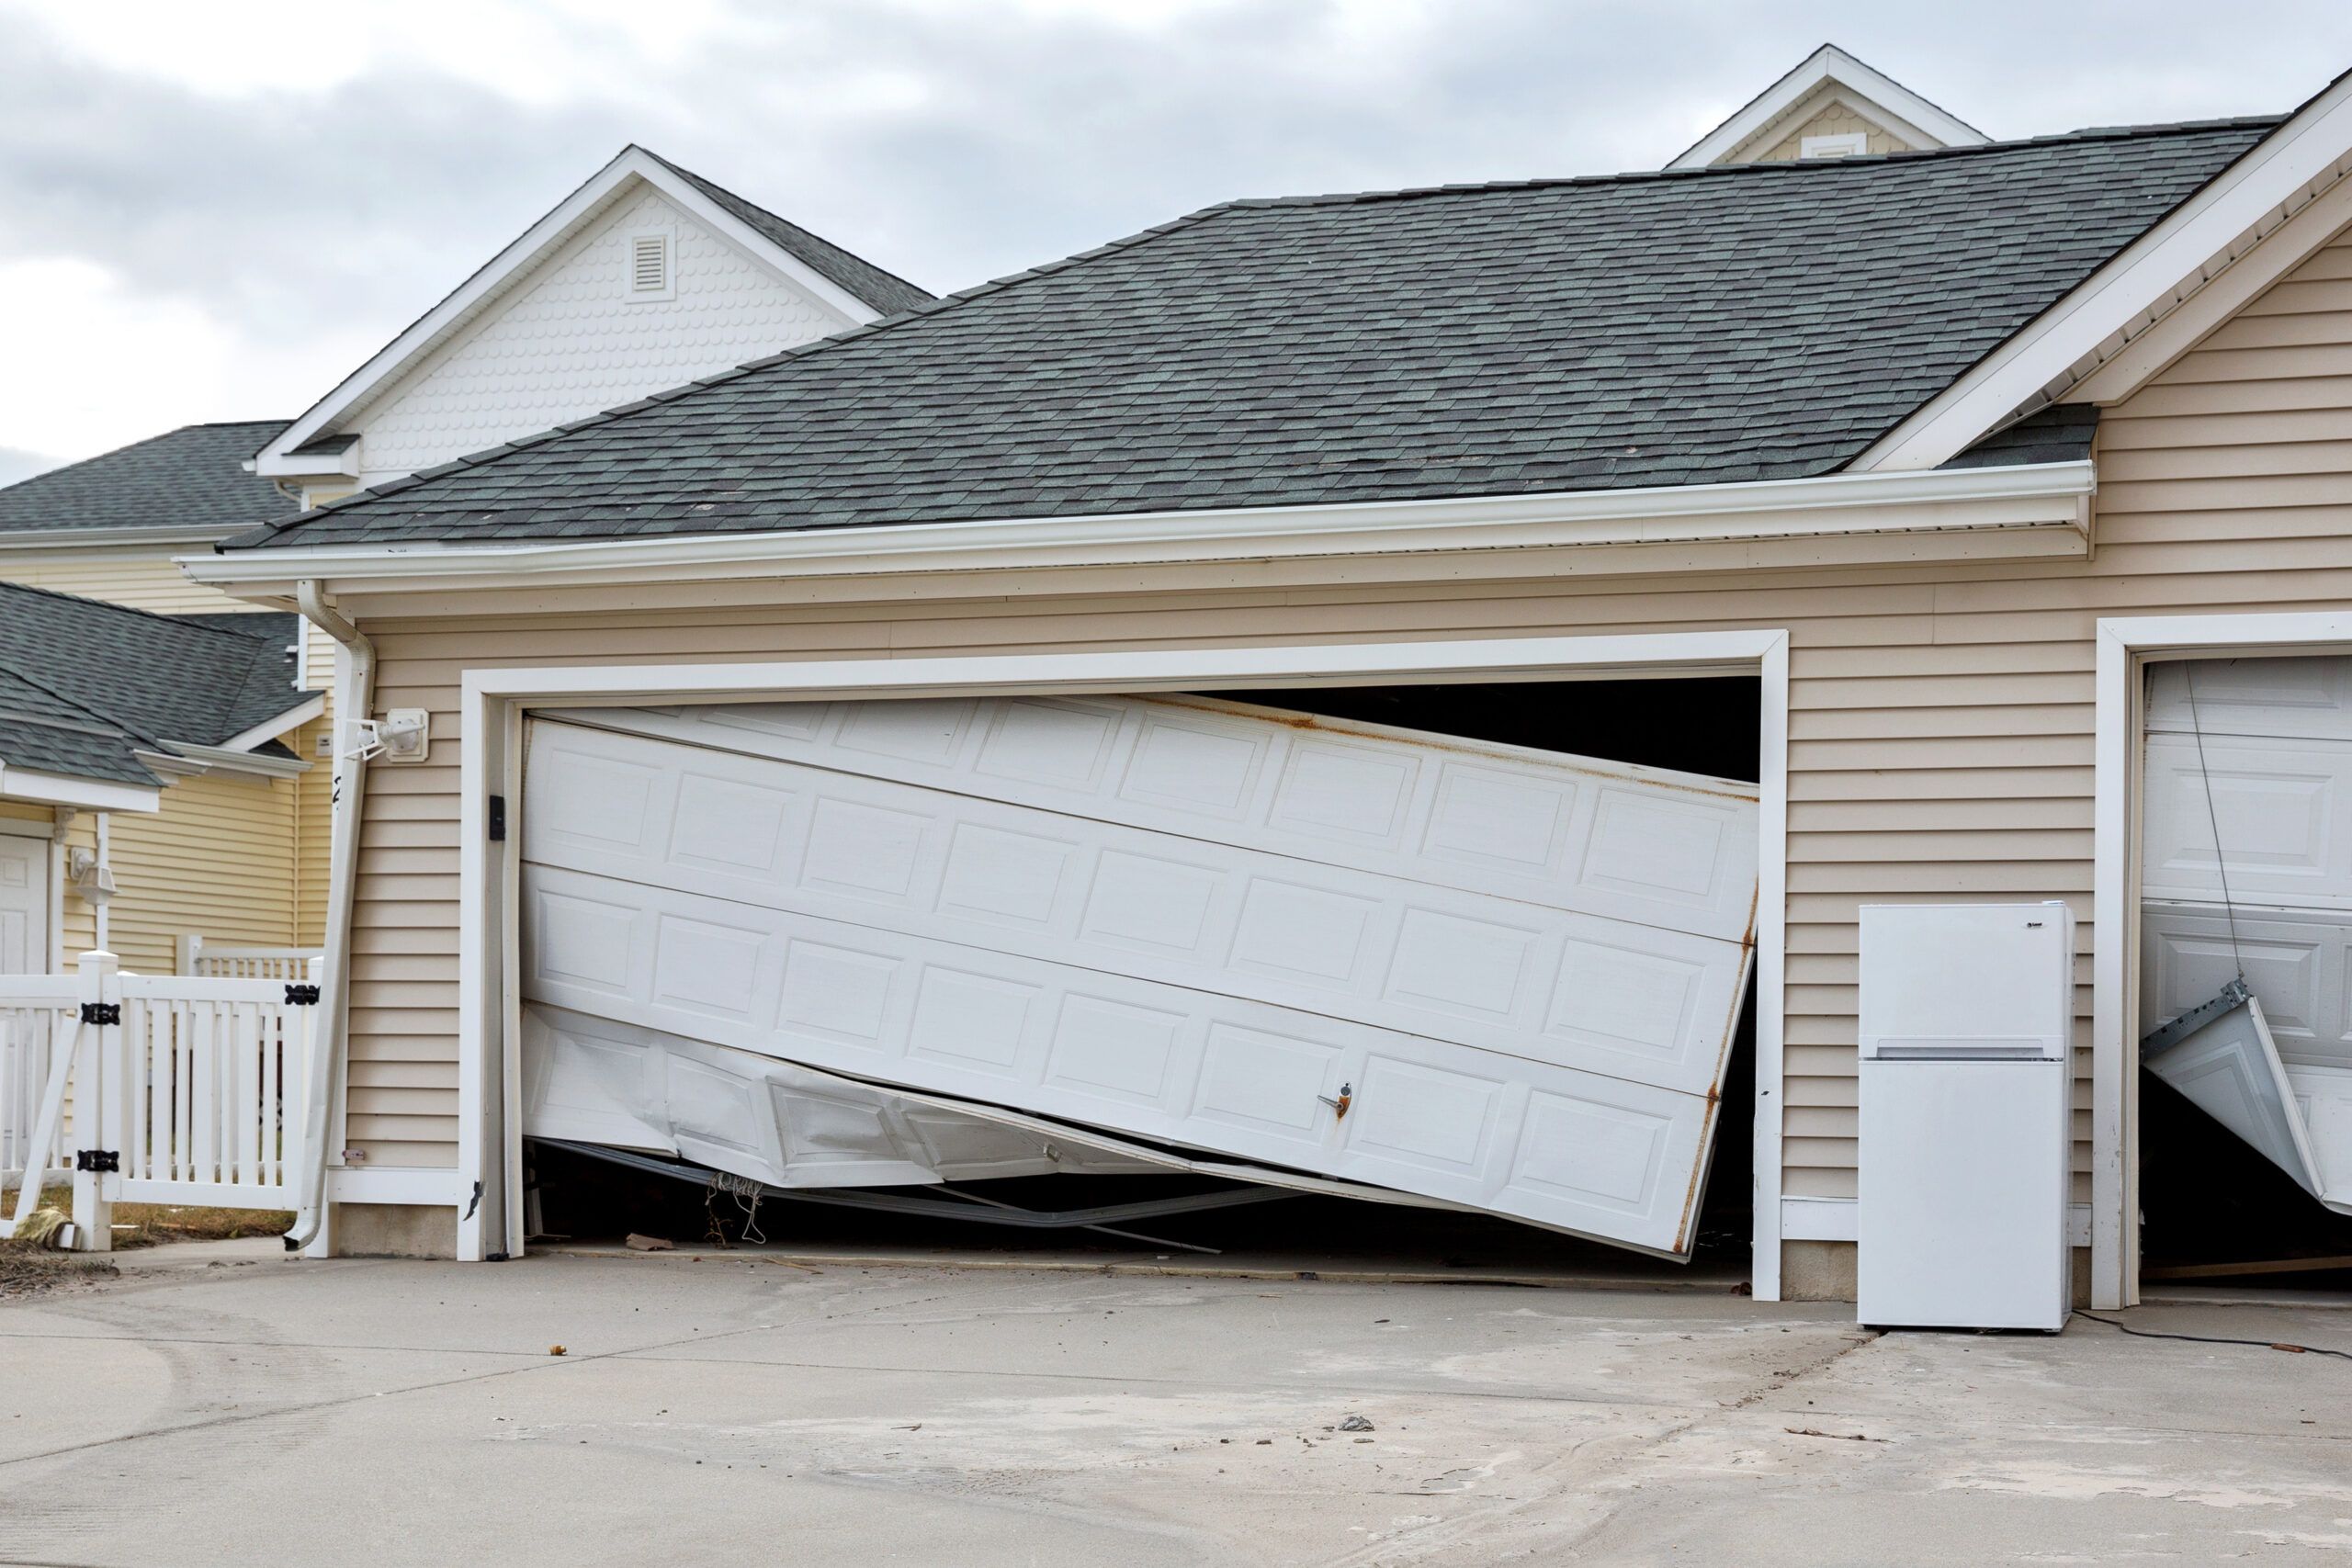 A garage door that was knocked off because of a hurricane